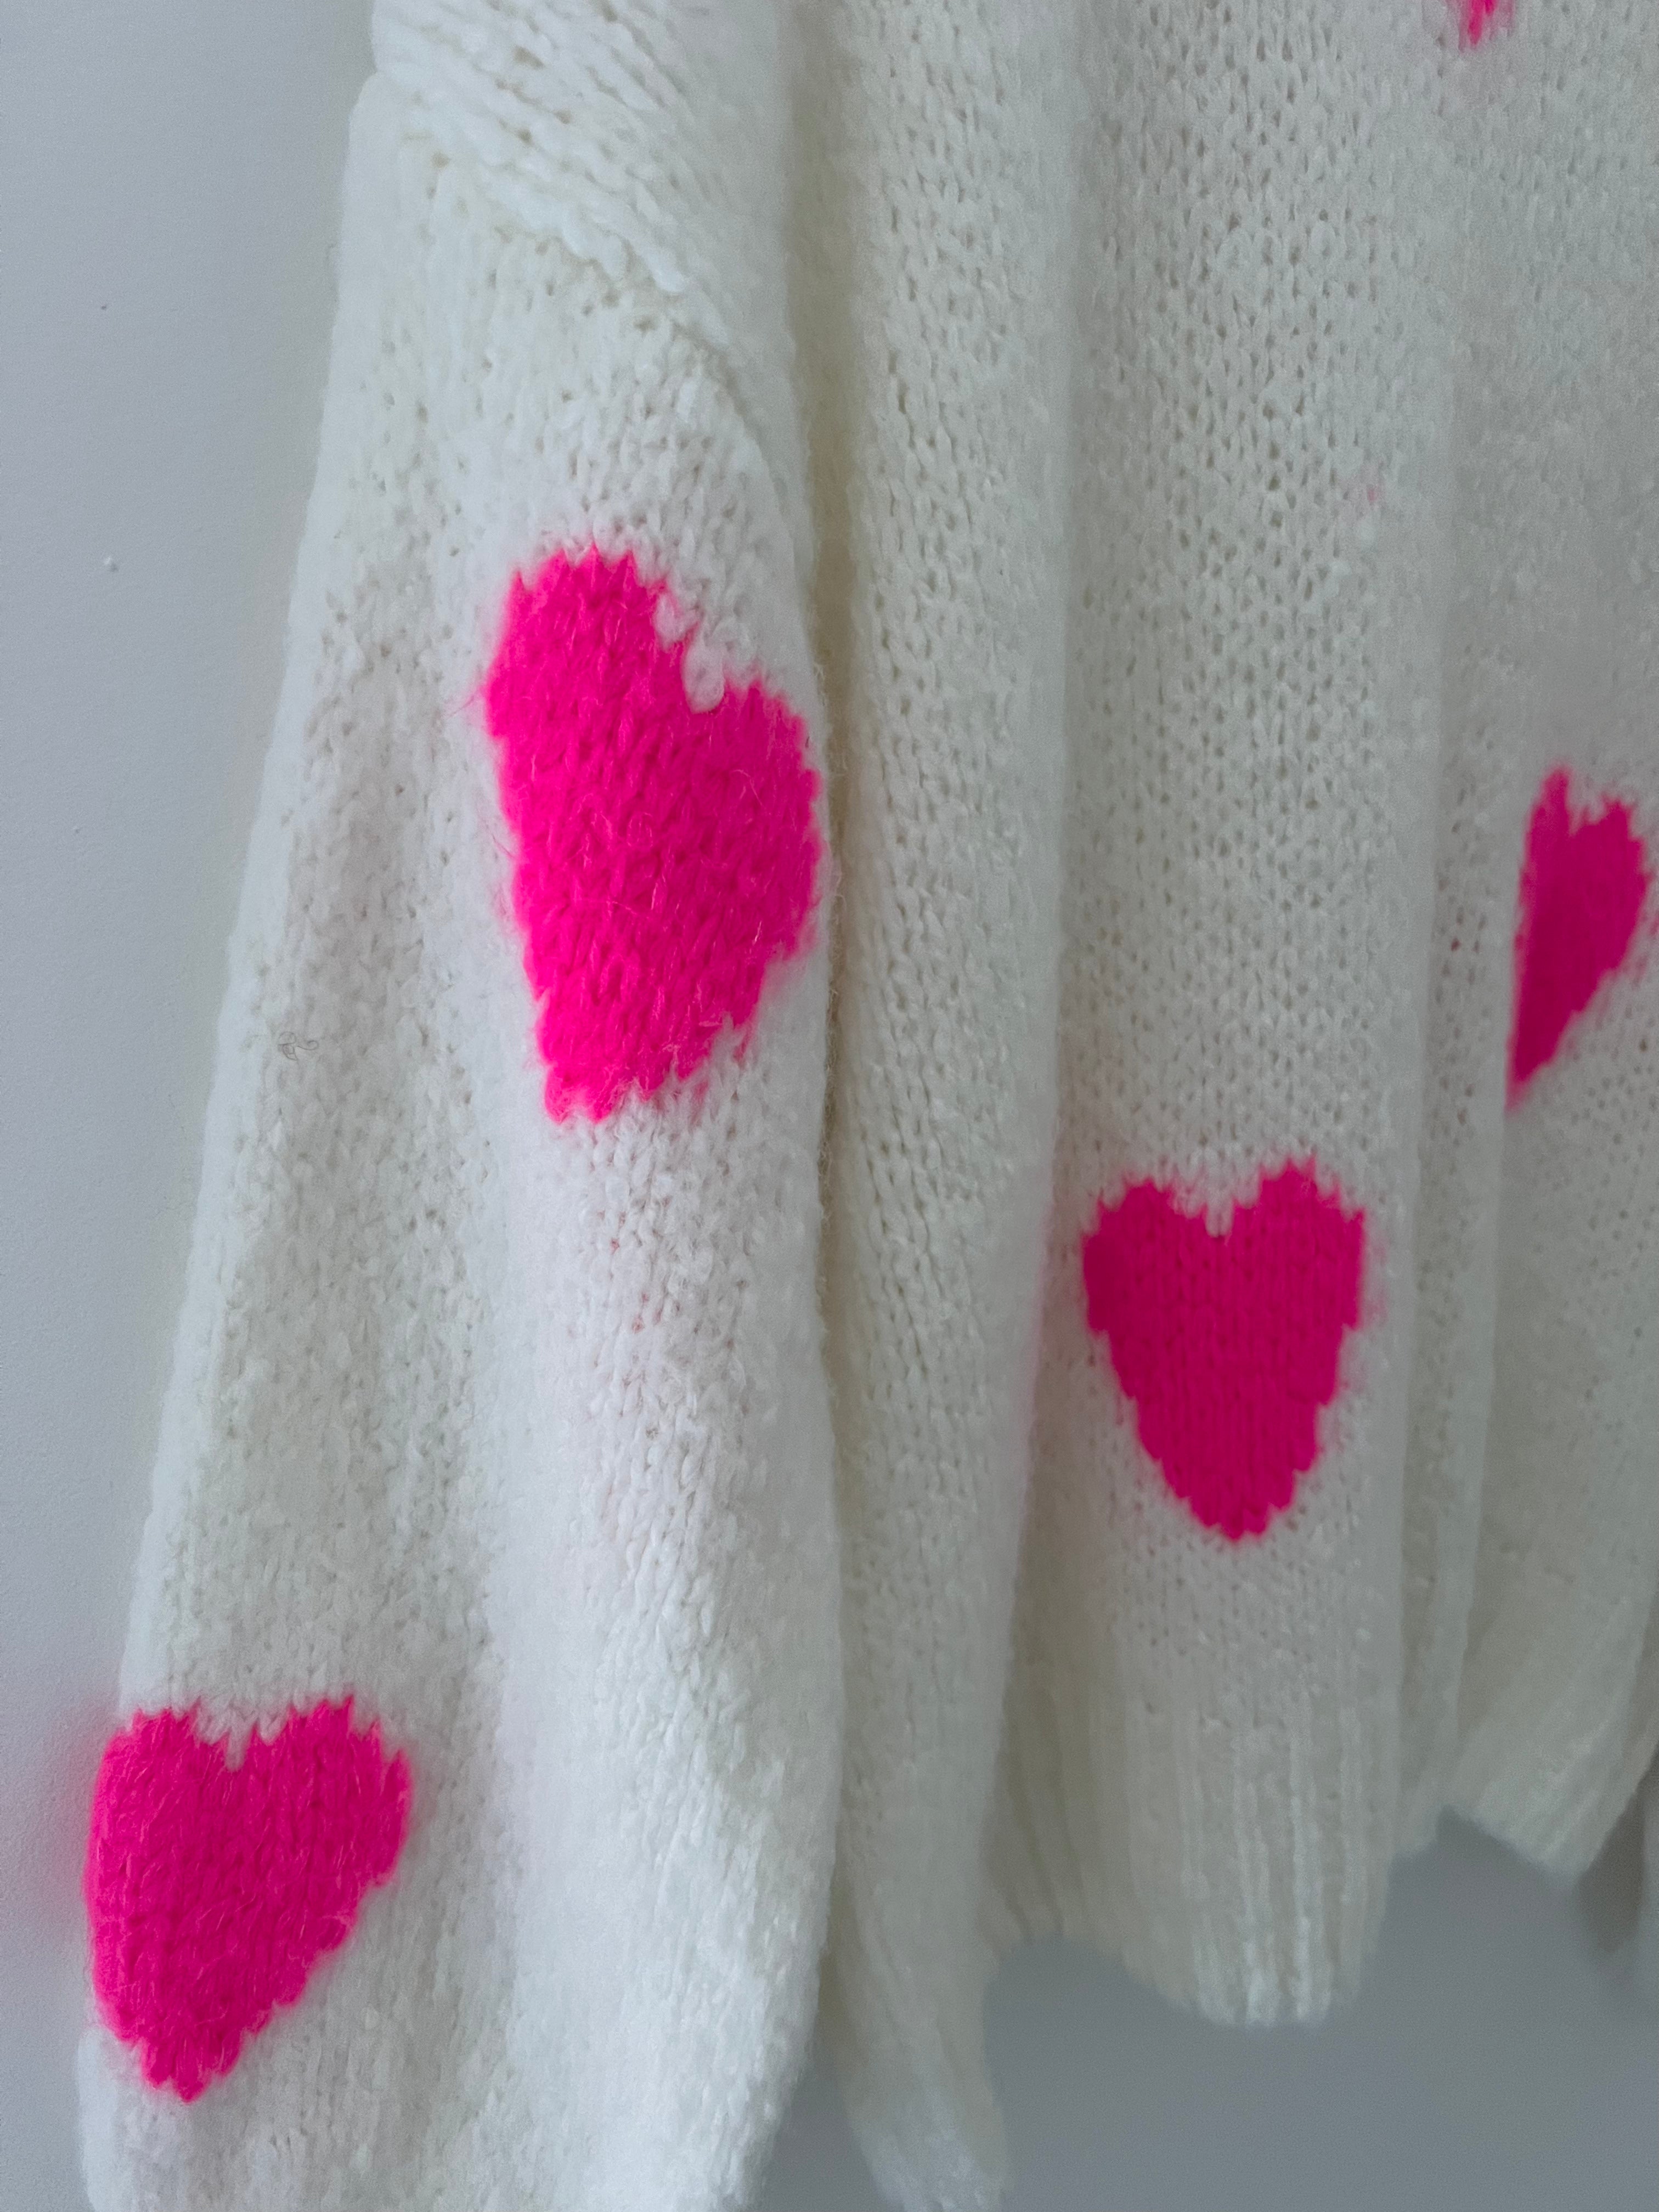 Softy Heart Sweater in Ivory & Pink